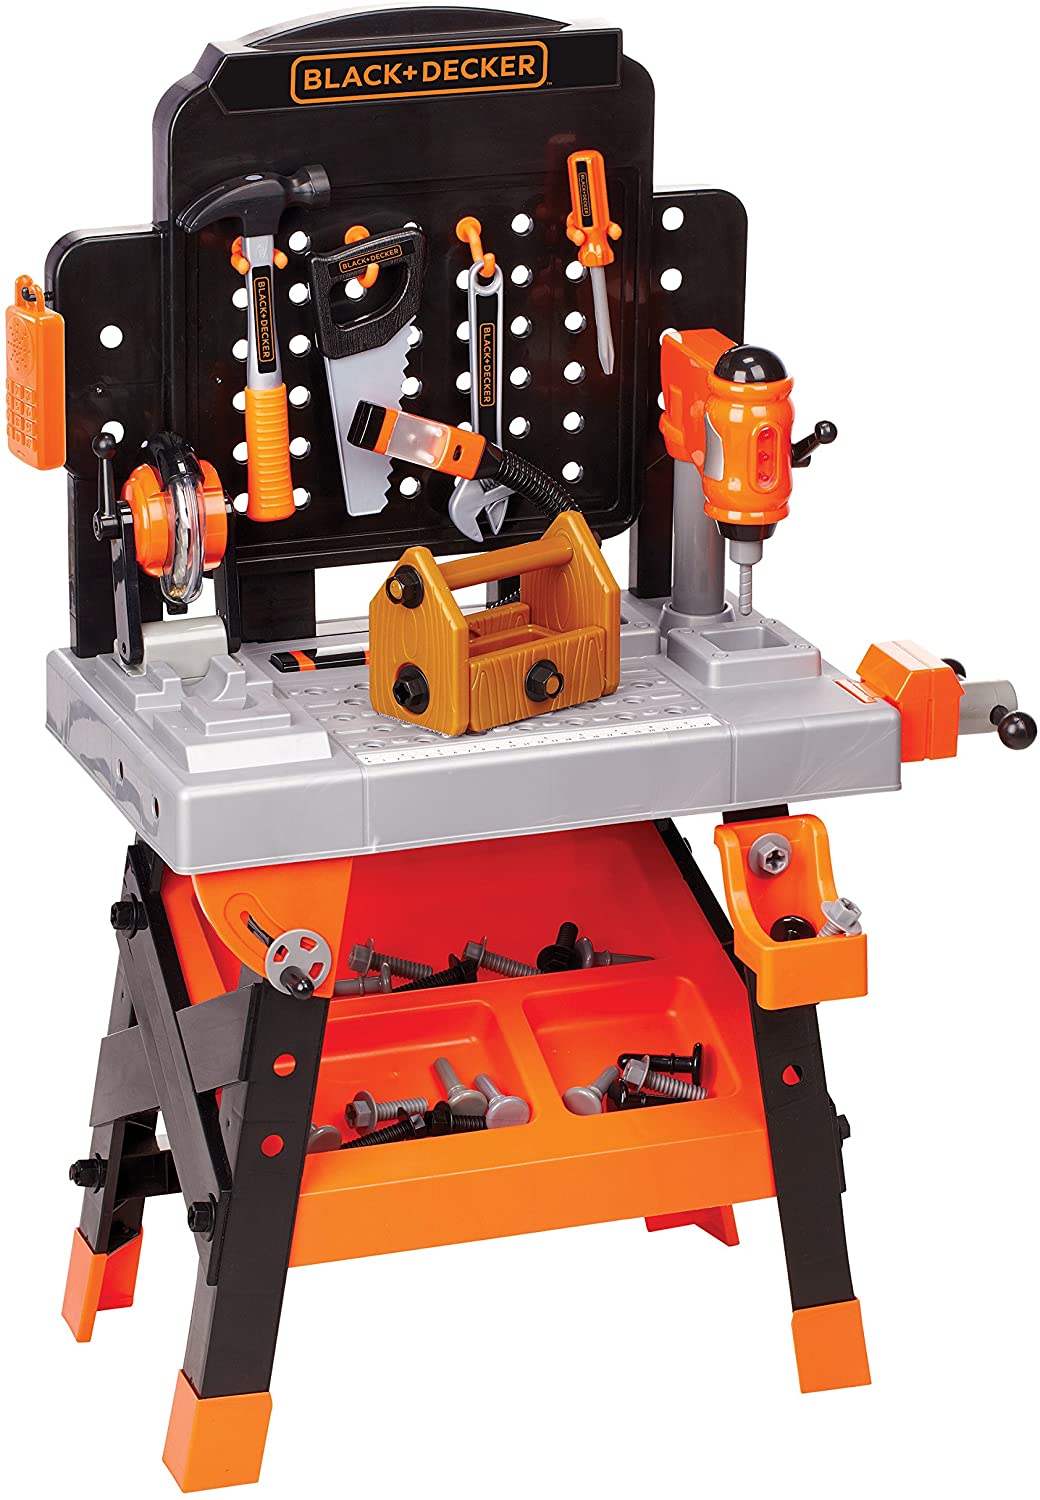 75-Piece Black+Decker Kids Power Tools Workshop Build Your Own Tool Box $45 + Free Shipping